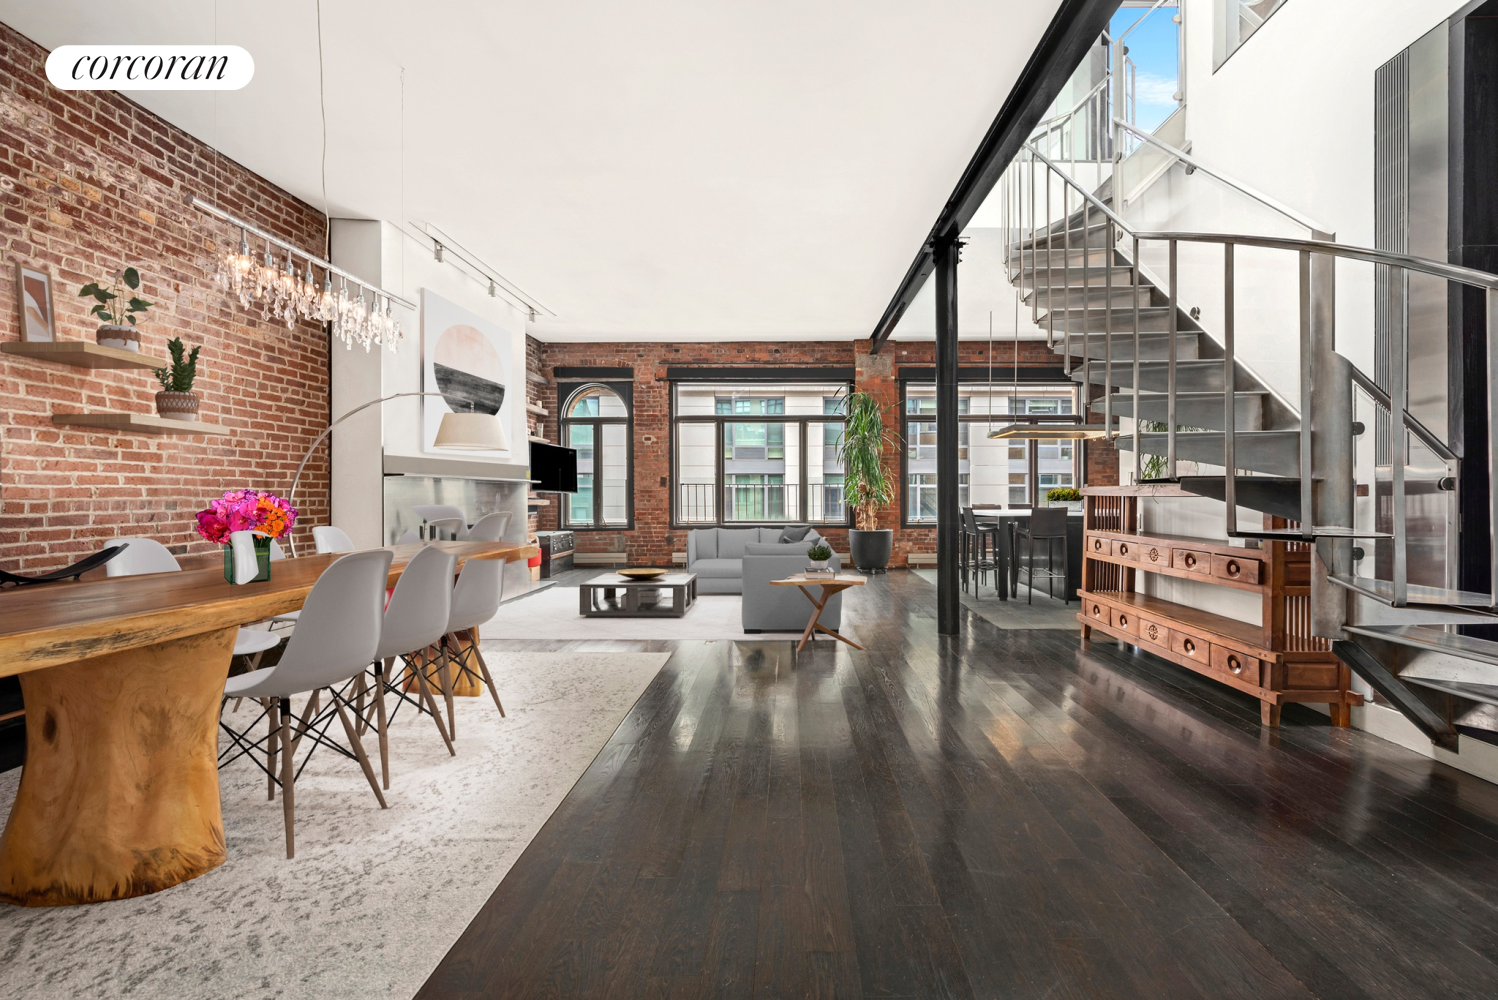 525 Broome Street Ph6, Soho, Downtown, NYC - 4 Bedrooms  
3.5 Bathrooms  
6 Rooms - 